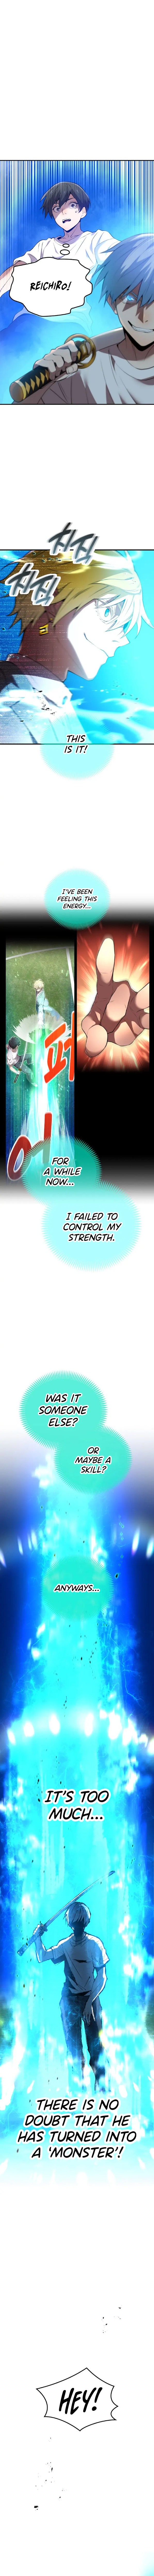 I am the Most Powerful Transcendent Being Chapter 5 - page 2